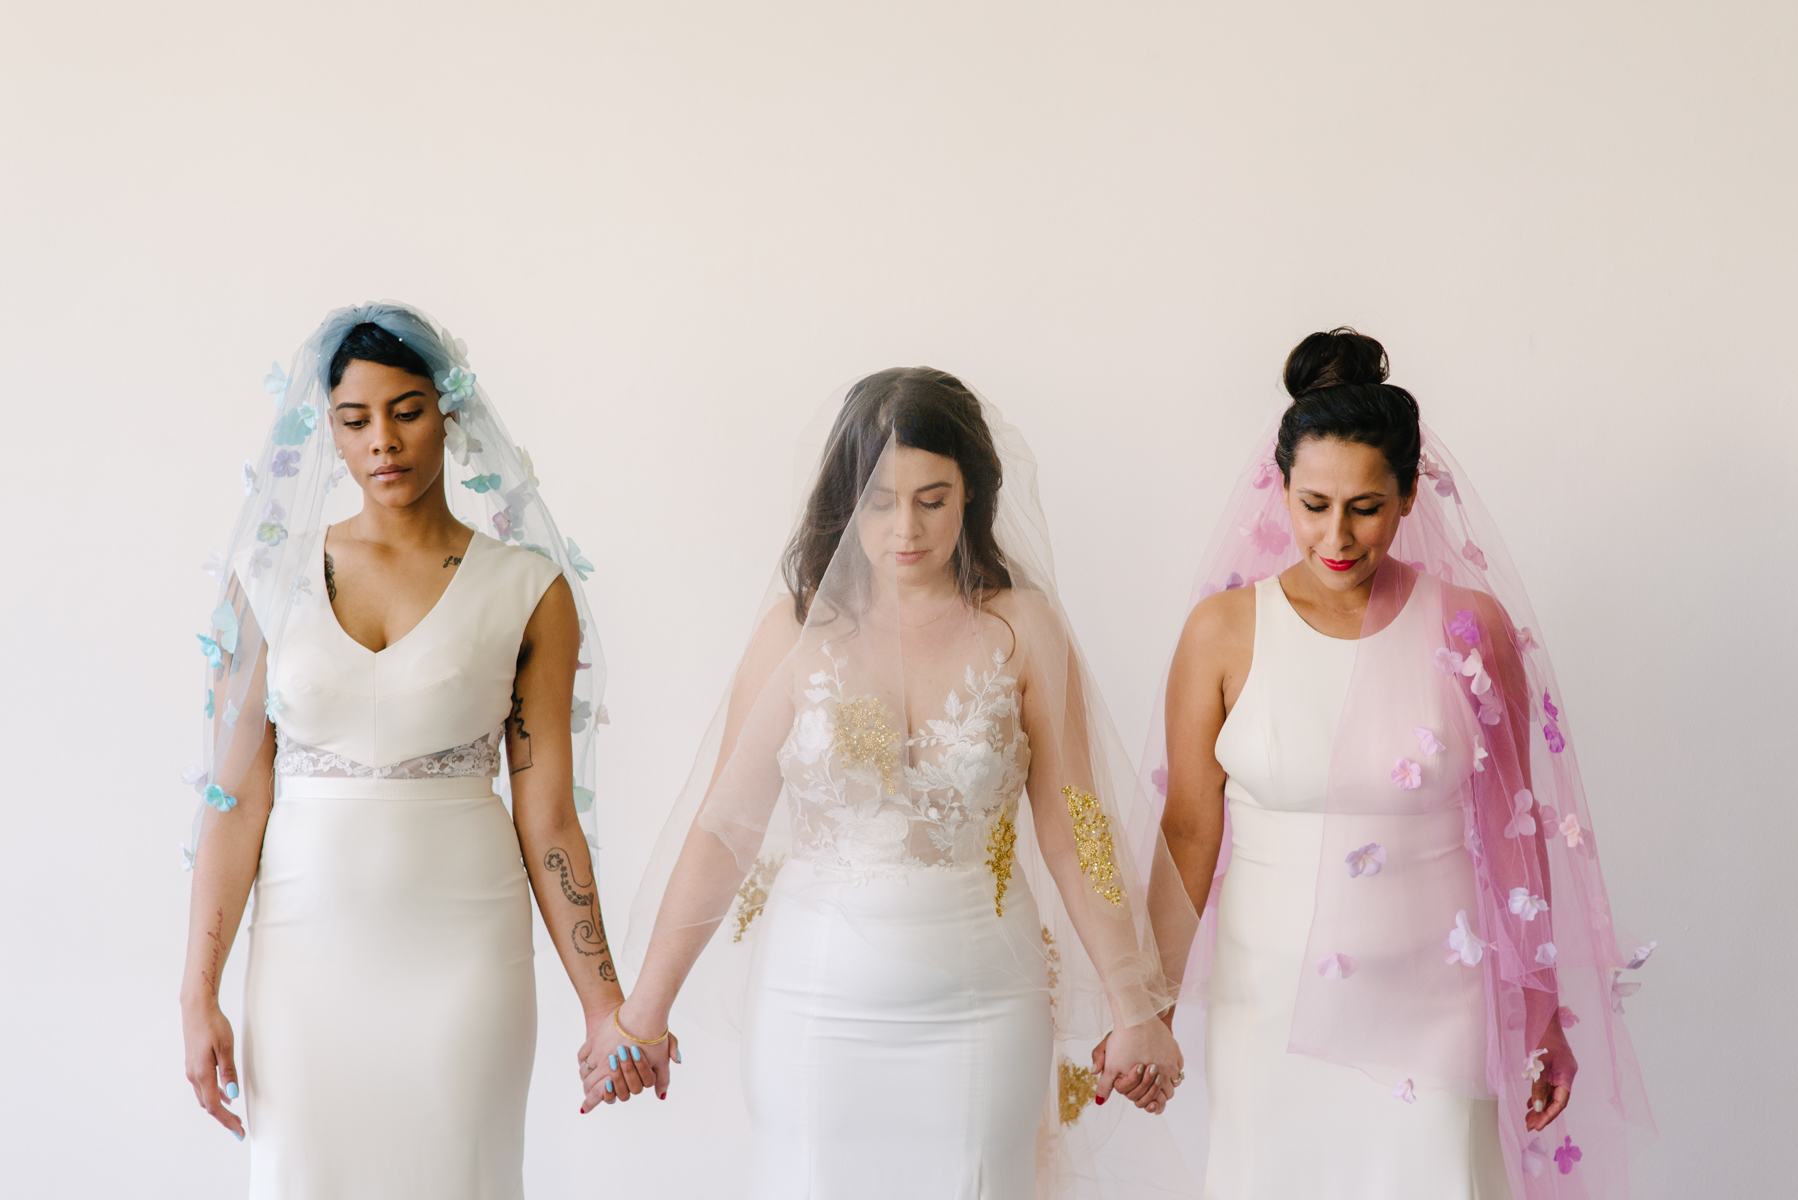 Three women hold hands in a moment of silence while wearing different colored wedding veils